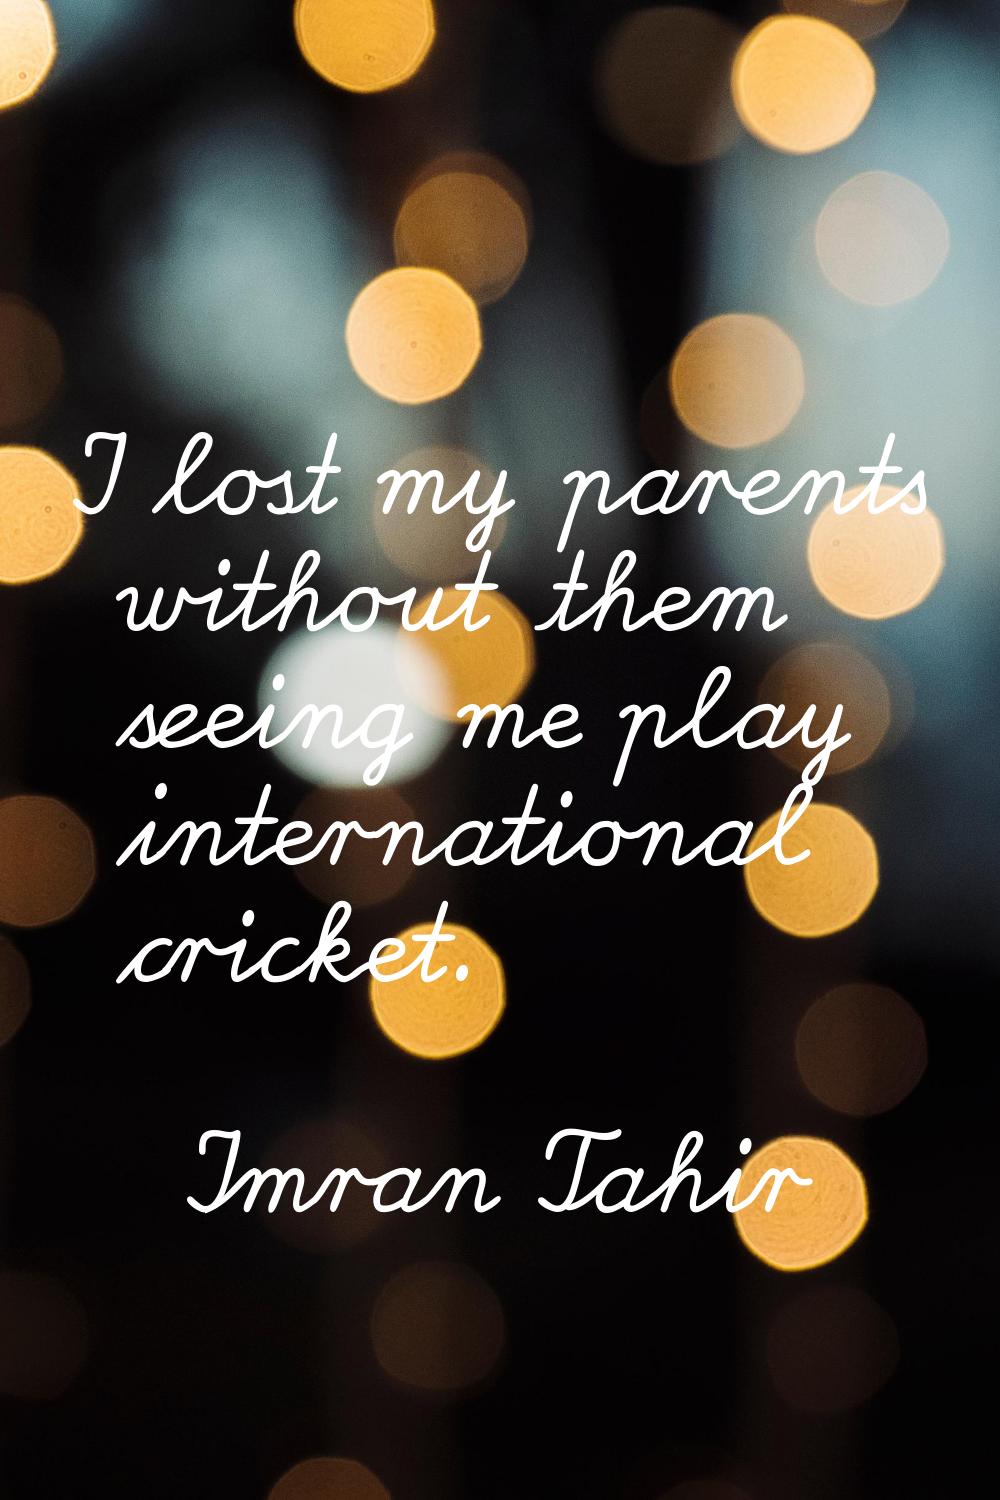 I lost my parents without them seeing me play international cricket.